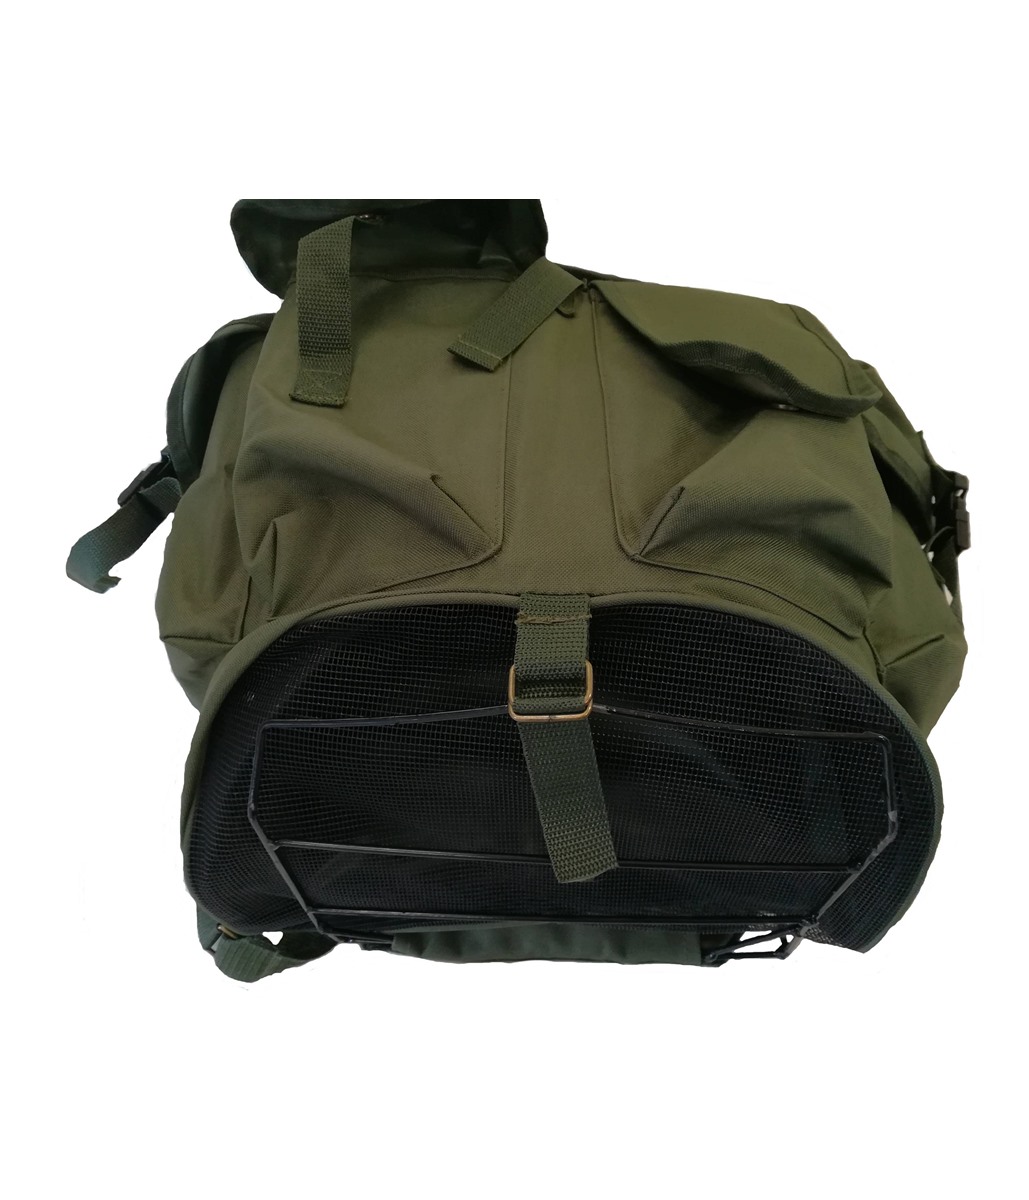 BACKPACK WITH NET BASKET